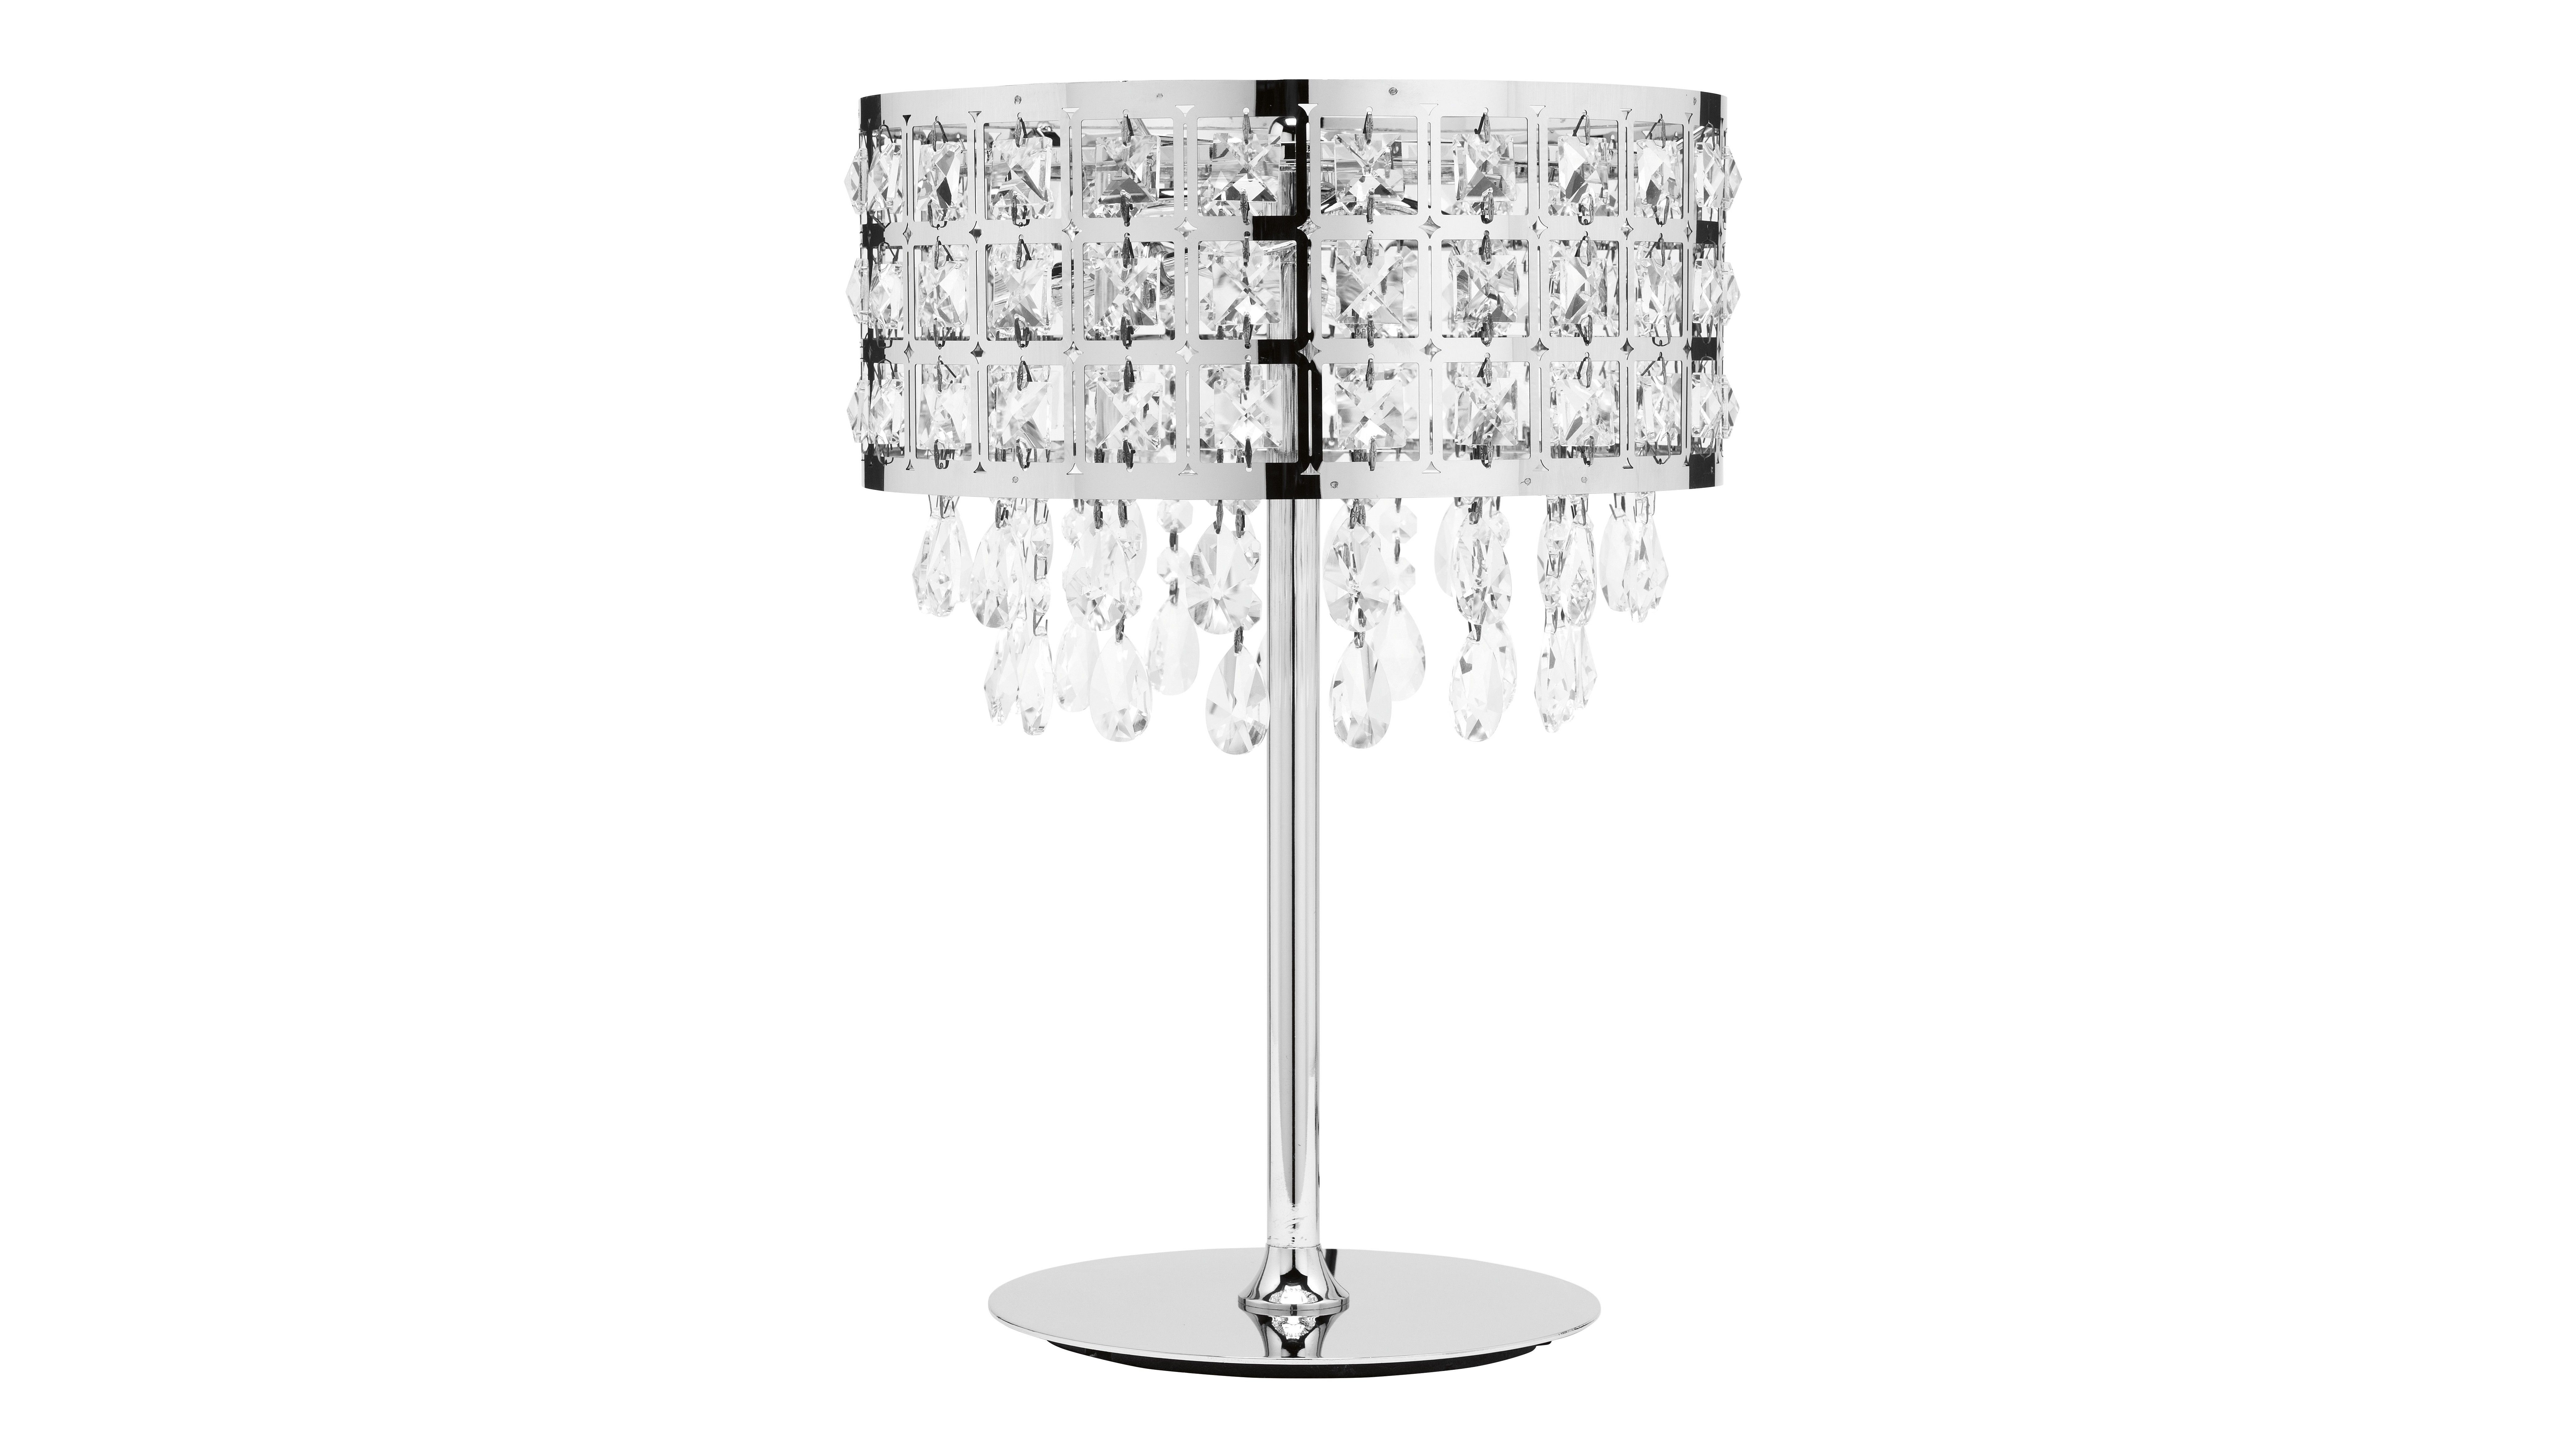 Soula Crystal Bedside Lamp Harvey Norman Bedside Lamps throughout sizing 8324 X 4682